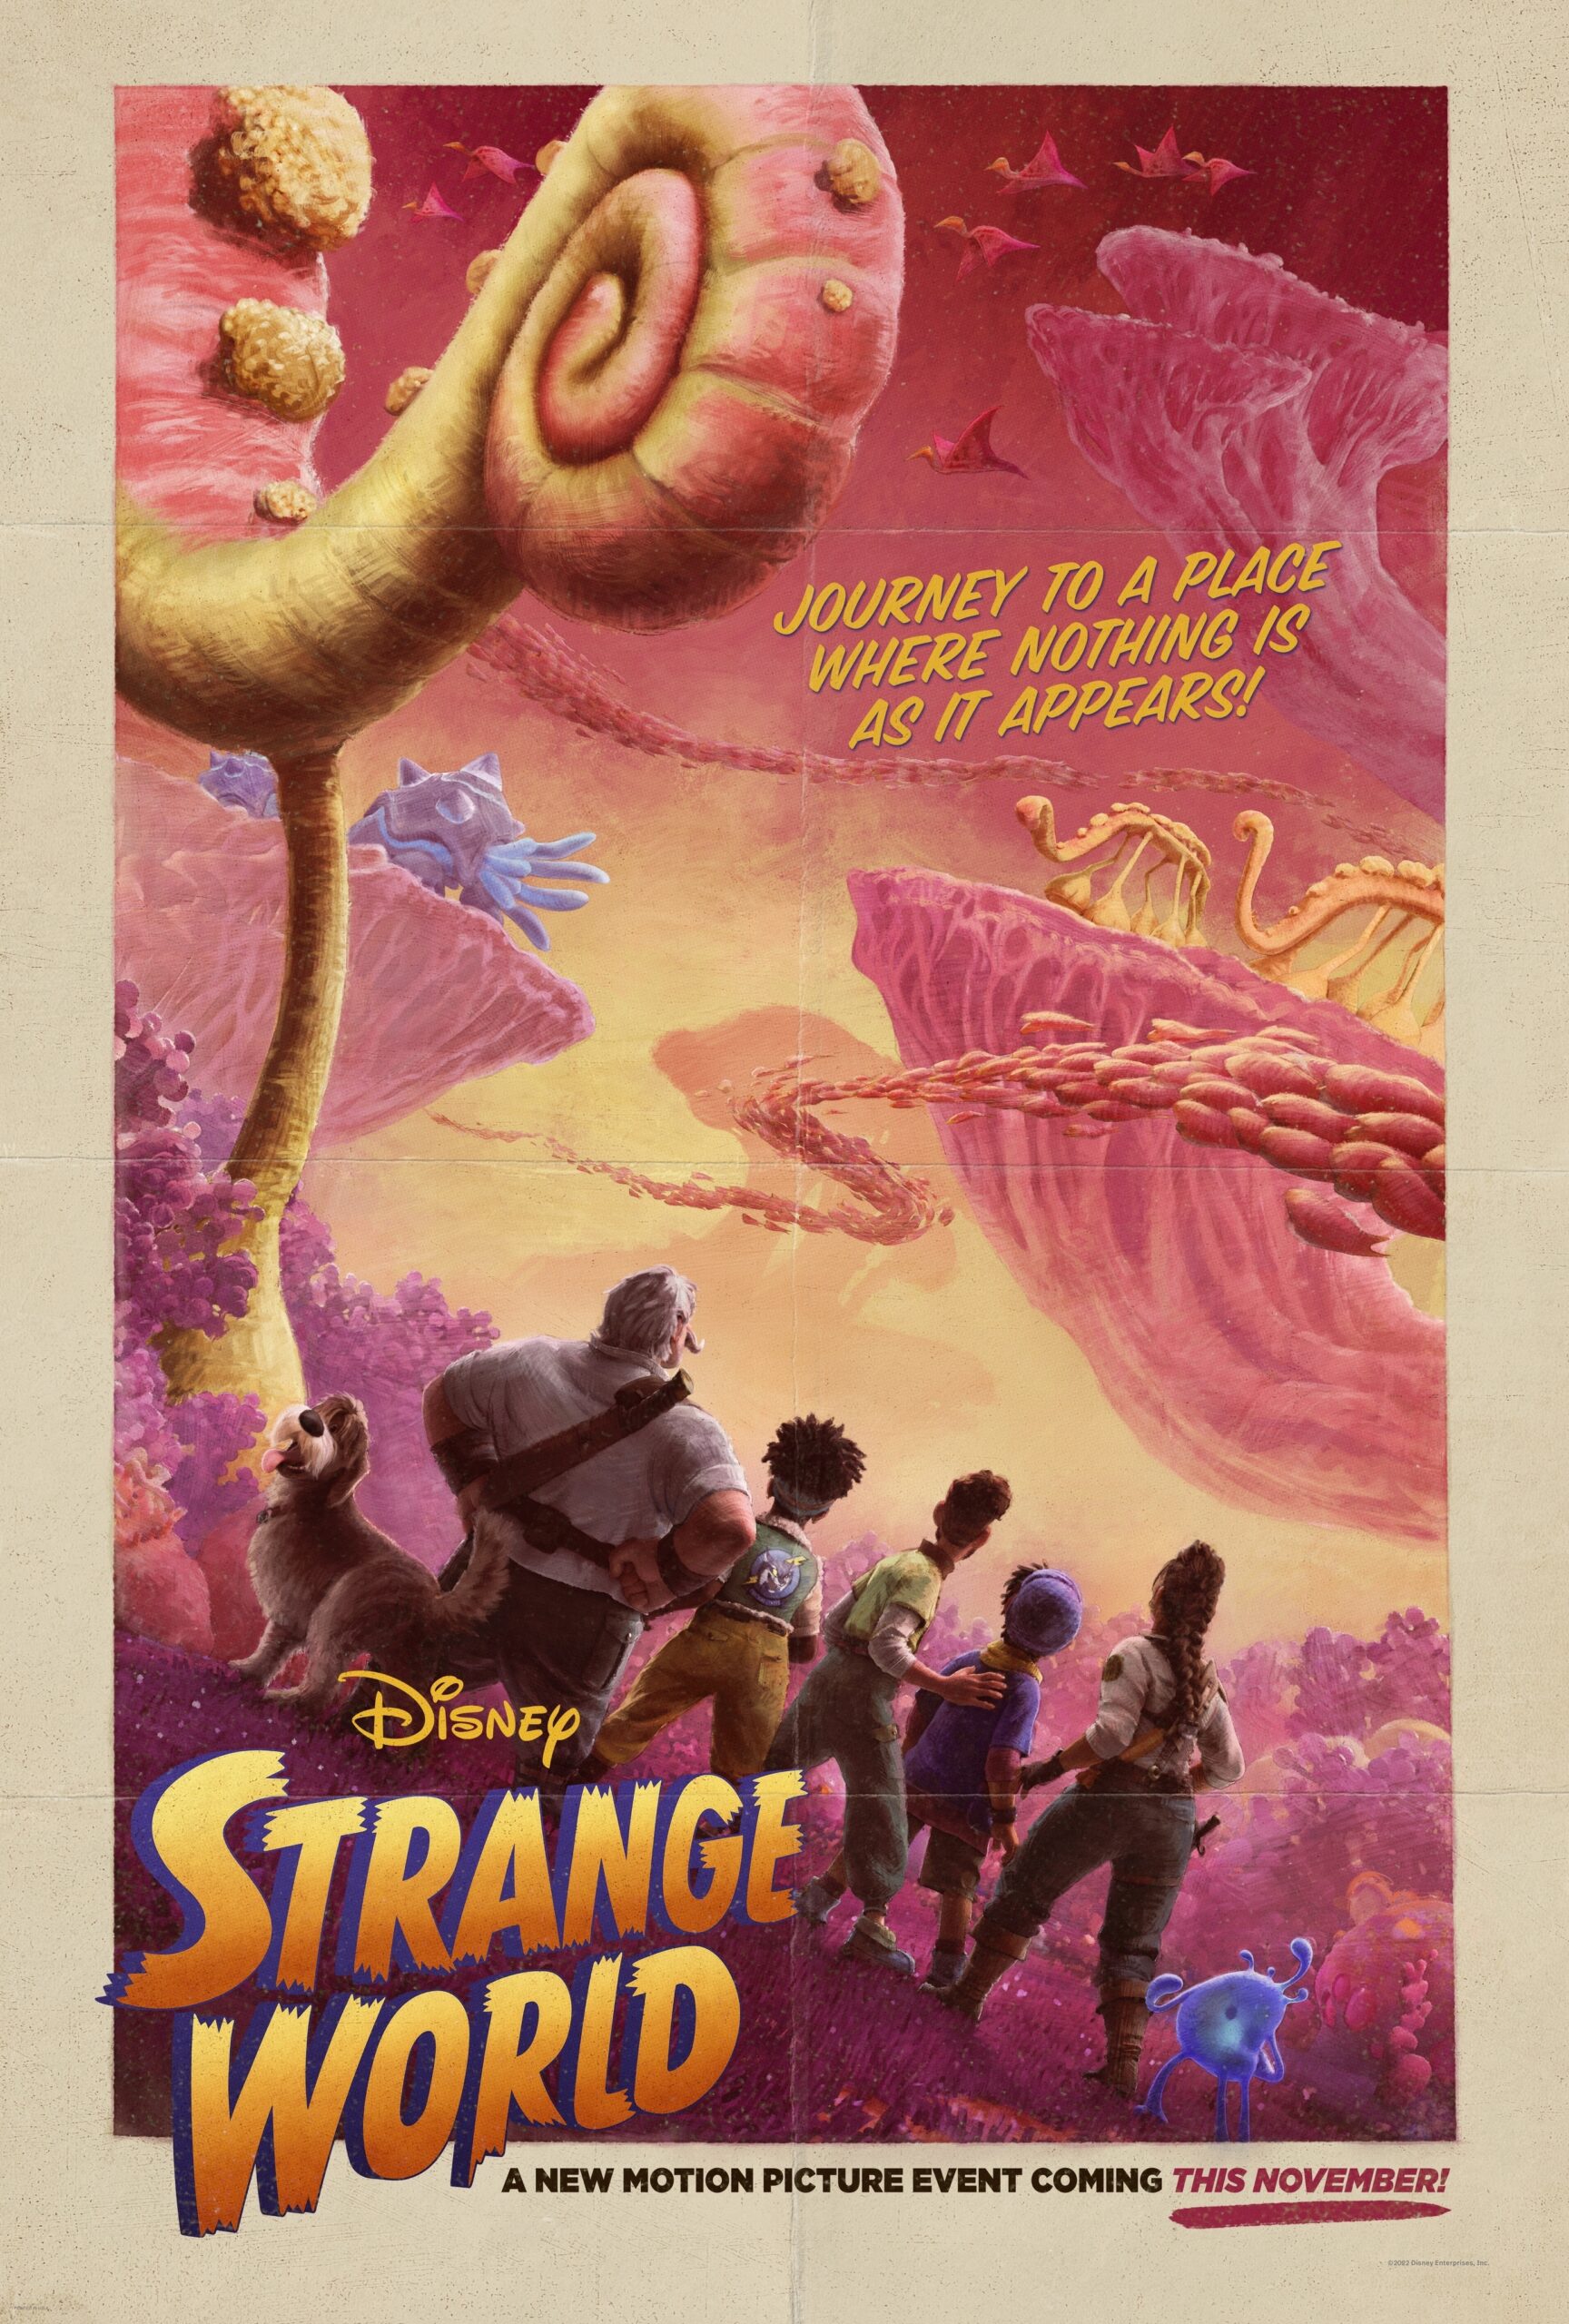 Strange World, photo courtesy of Walt Disney Studios Motion Pictures. © 2022 Disney. All Rights Reserved.